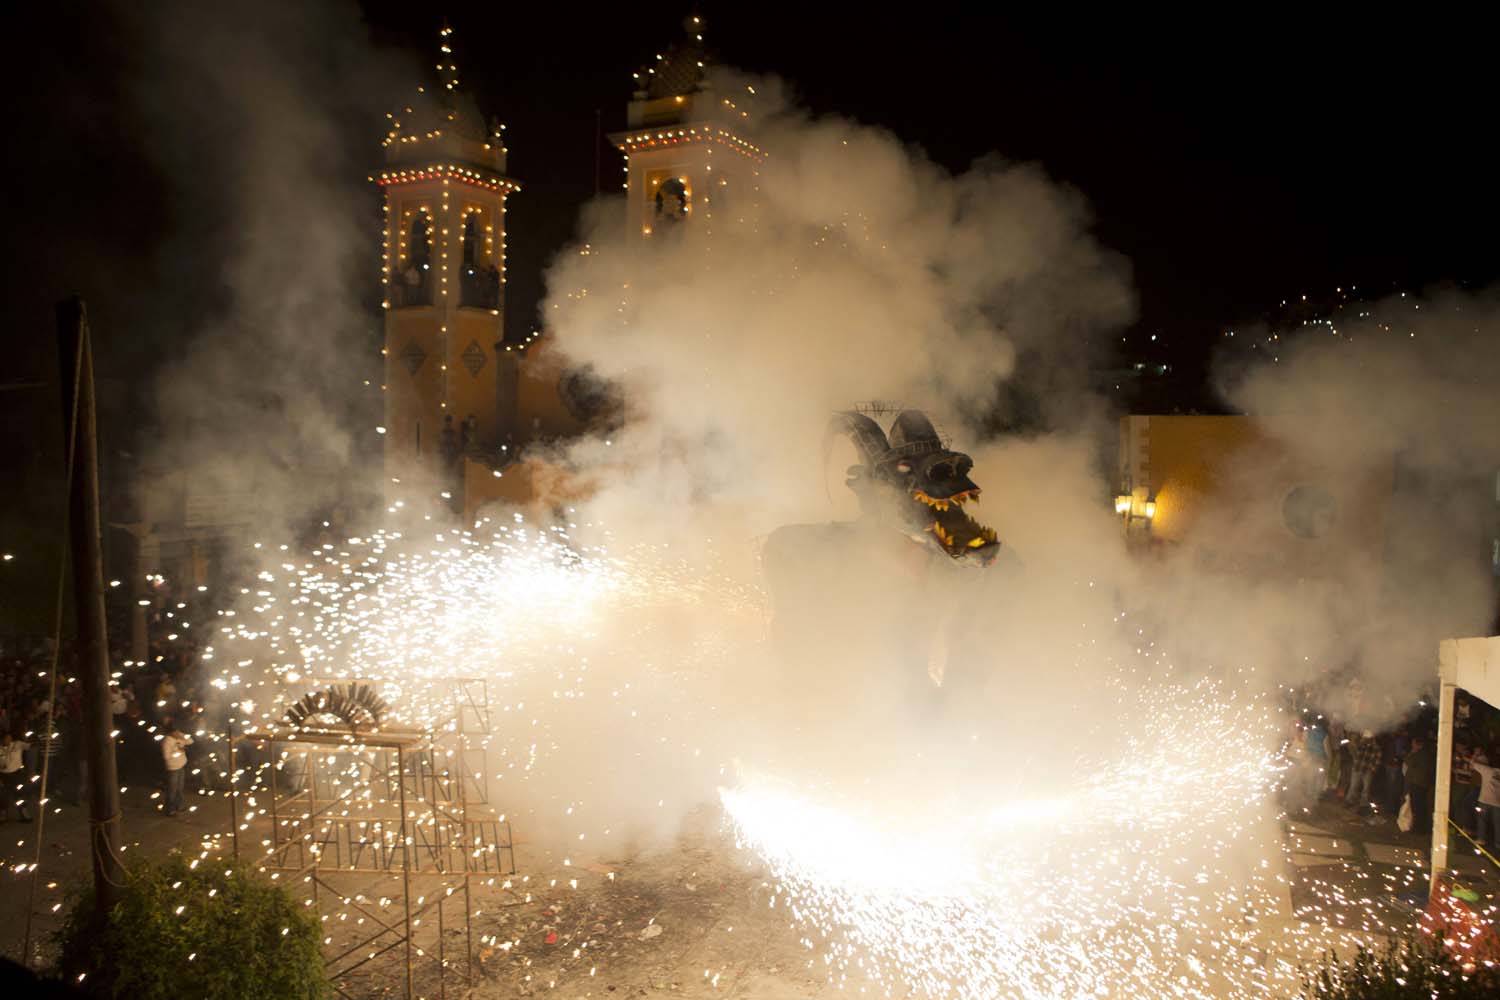 Apr. 20, 2014. An effigy of Judas is engulfed in fireworks, in the courtyard of the Santa Rosa Xochiac church, in Mexico City, soon after midnight on Easter Sunday.